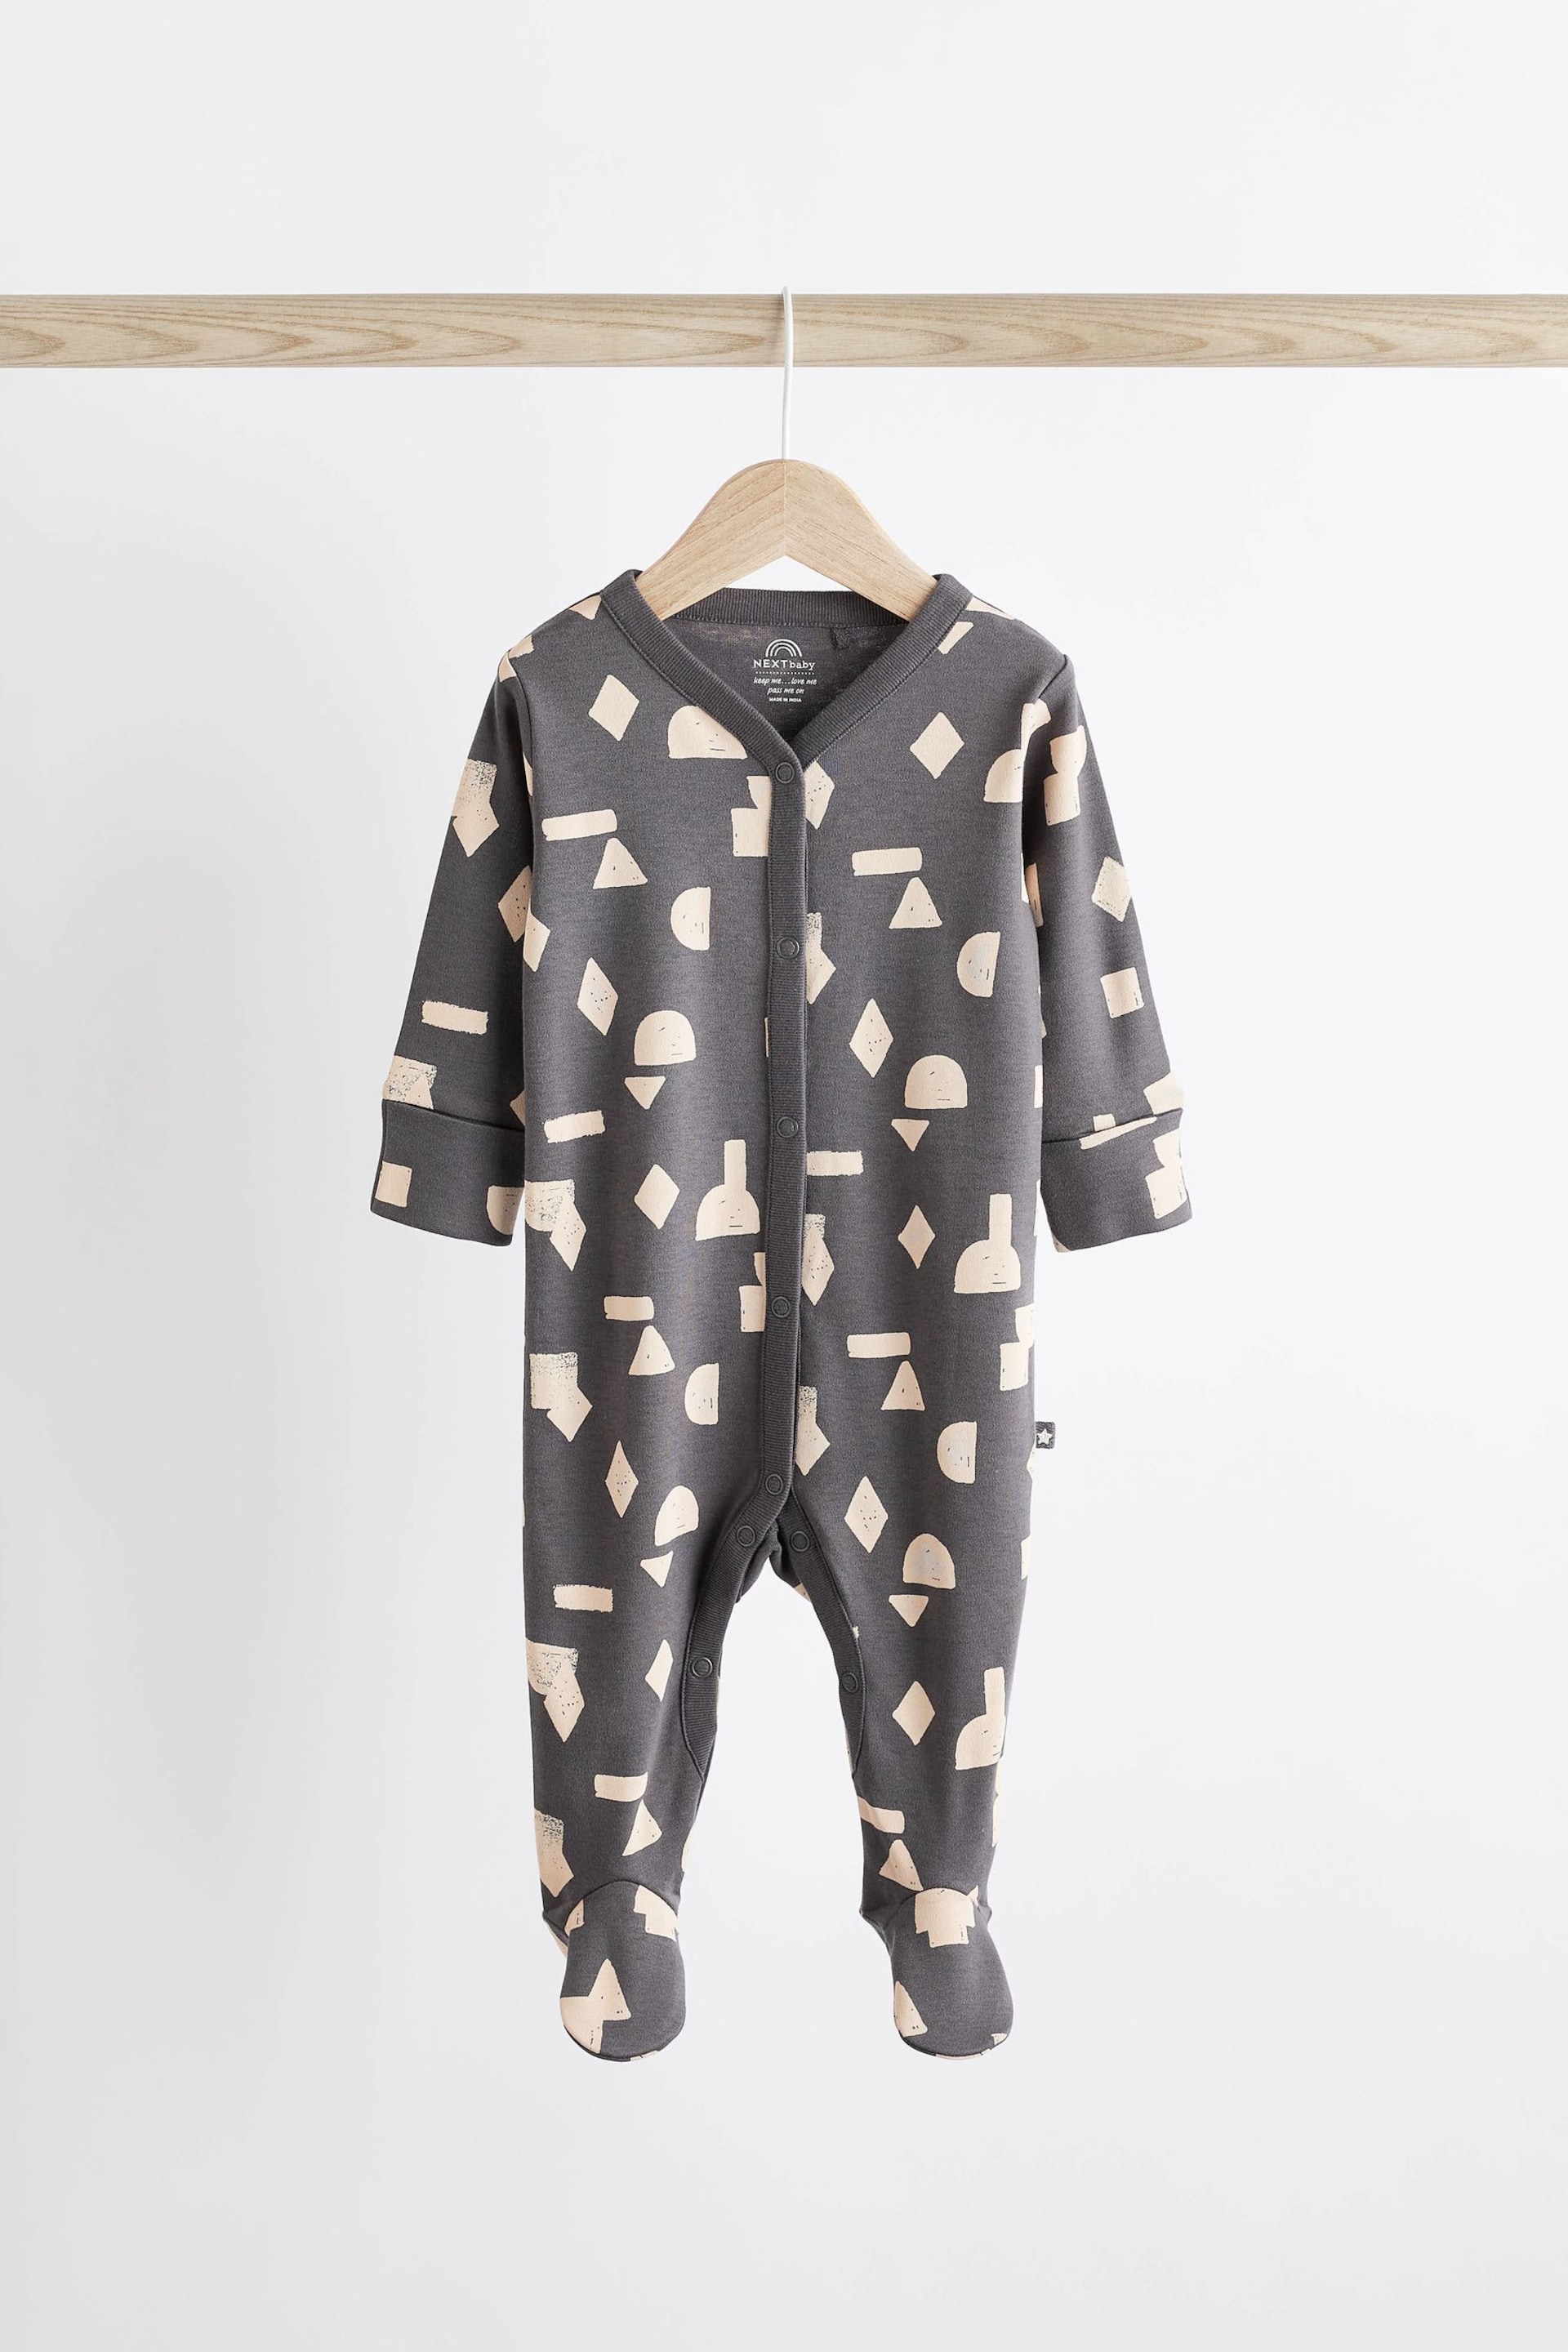 Monochrome Baby Sleepsuits 3 Pack (0mths-3yrs) - Image 5 of 11